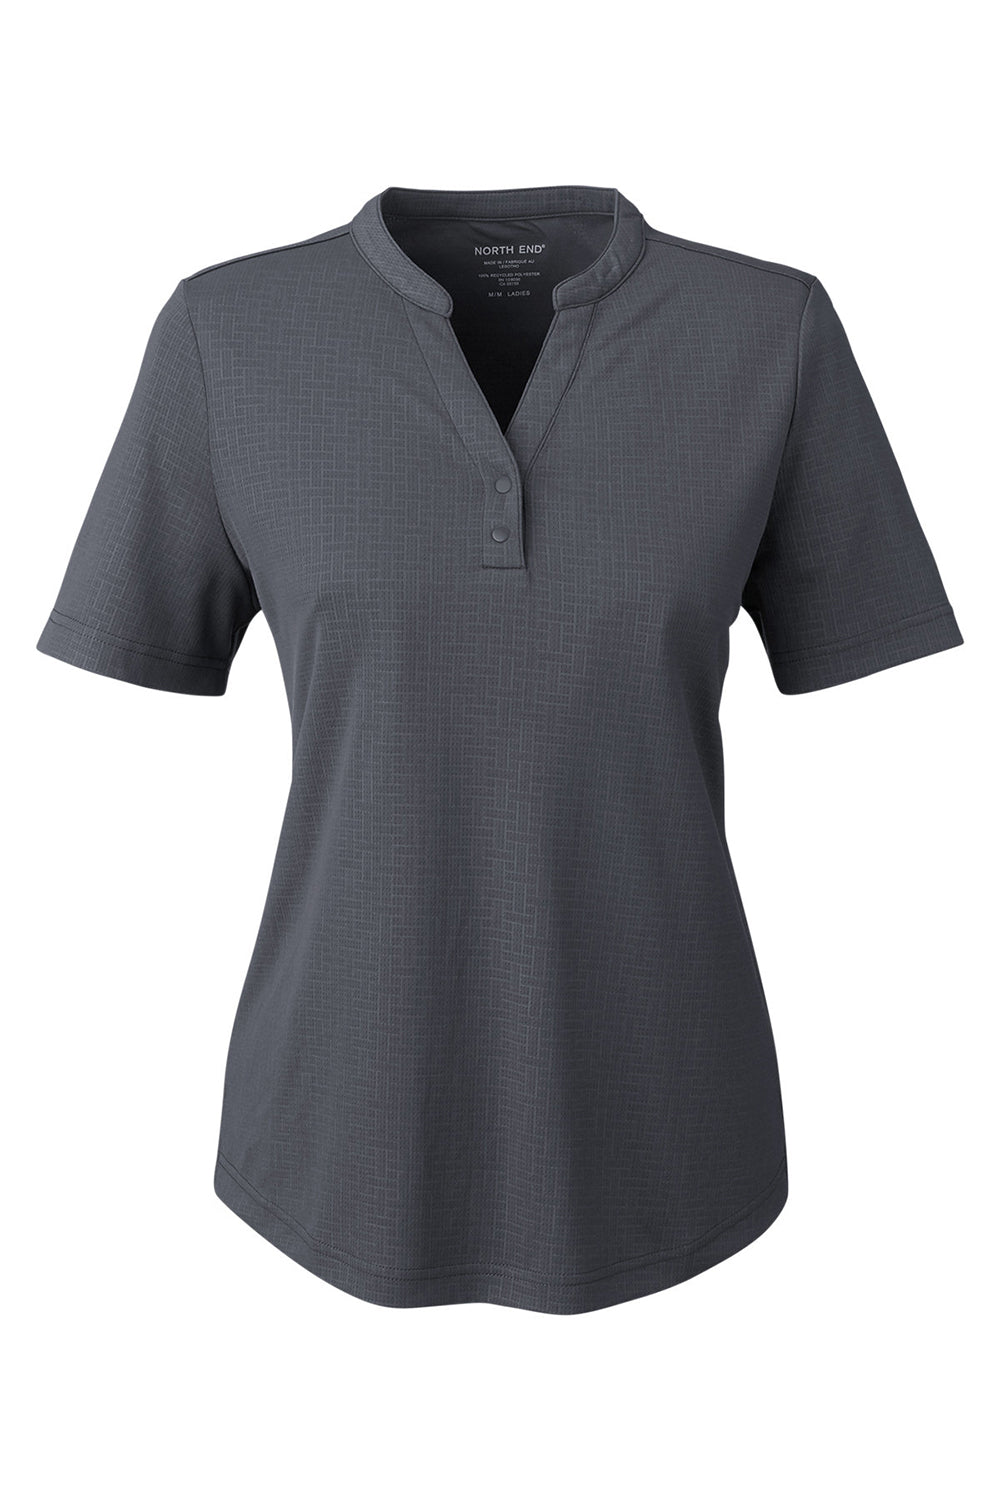 North Short Sleeve Wicking Moisture Womens Grey — End Carbon Replay Shirt NE102W Recycled Polo